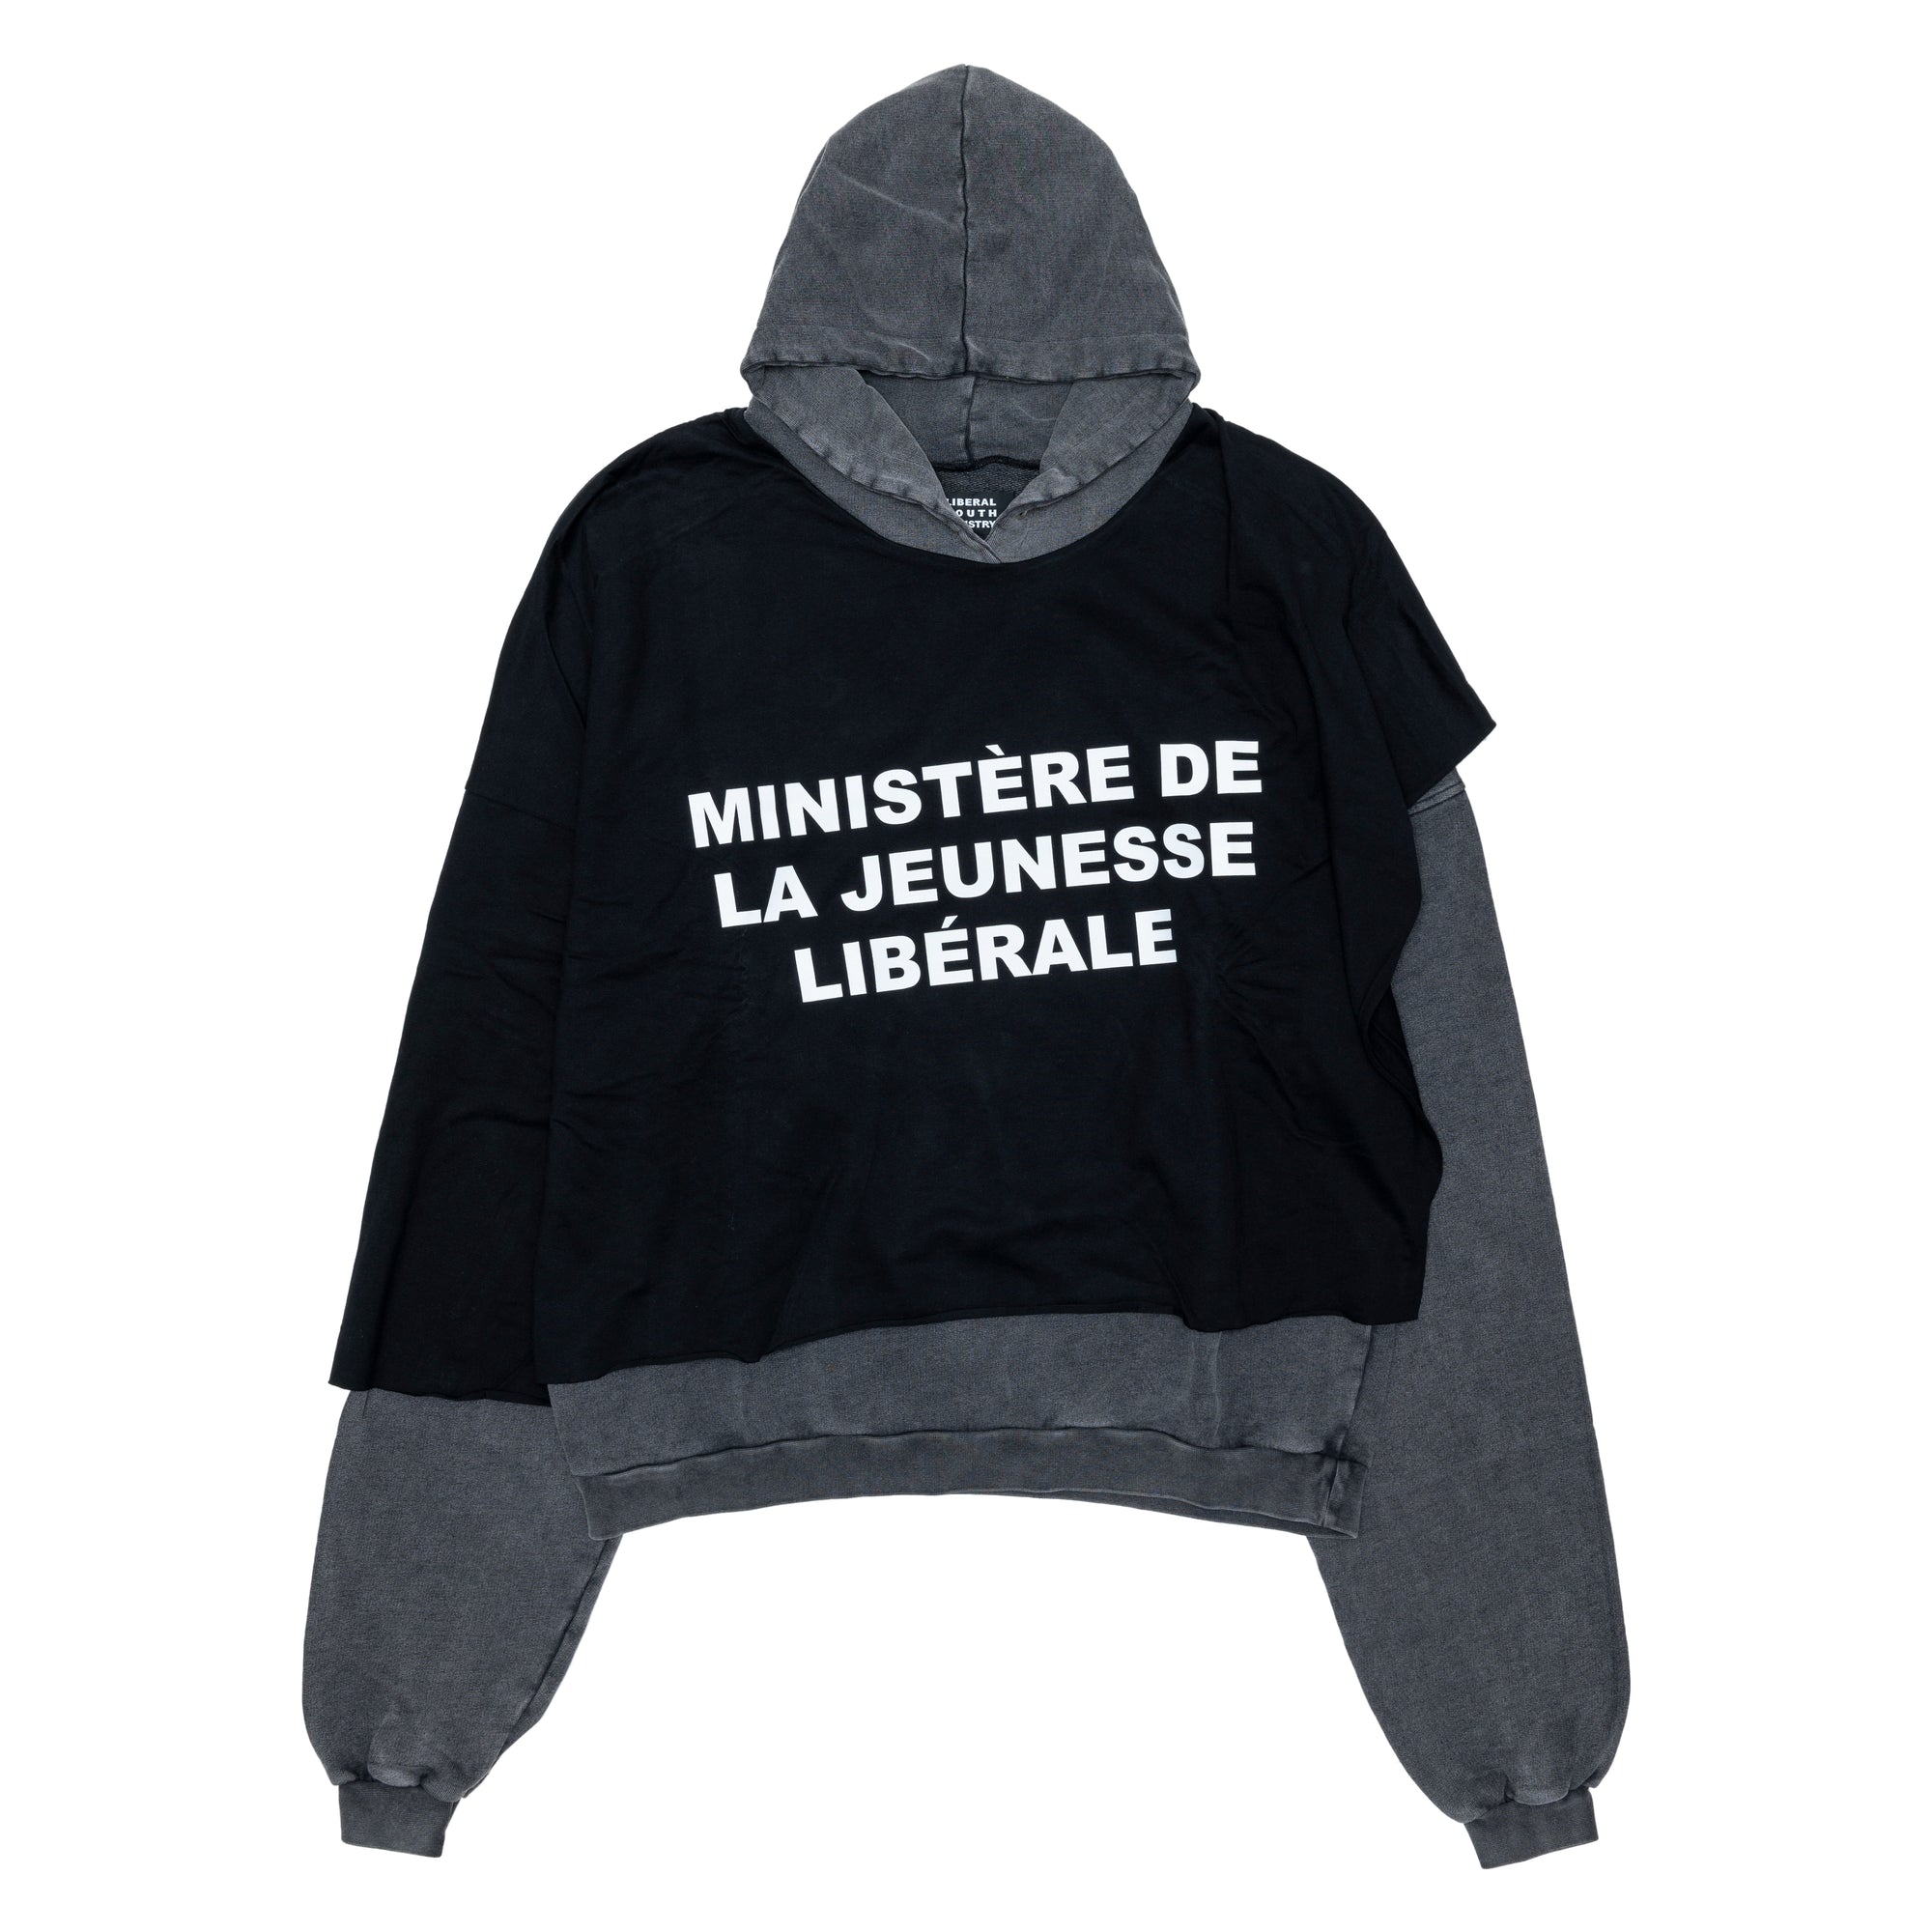 LIBERAL YOUTH MINISTRY - Men Hoodie With Half Sweatshirt Overlayed - Knit - (Black) view 1